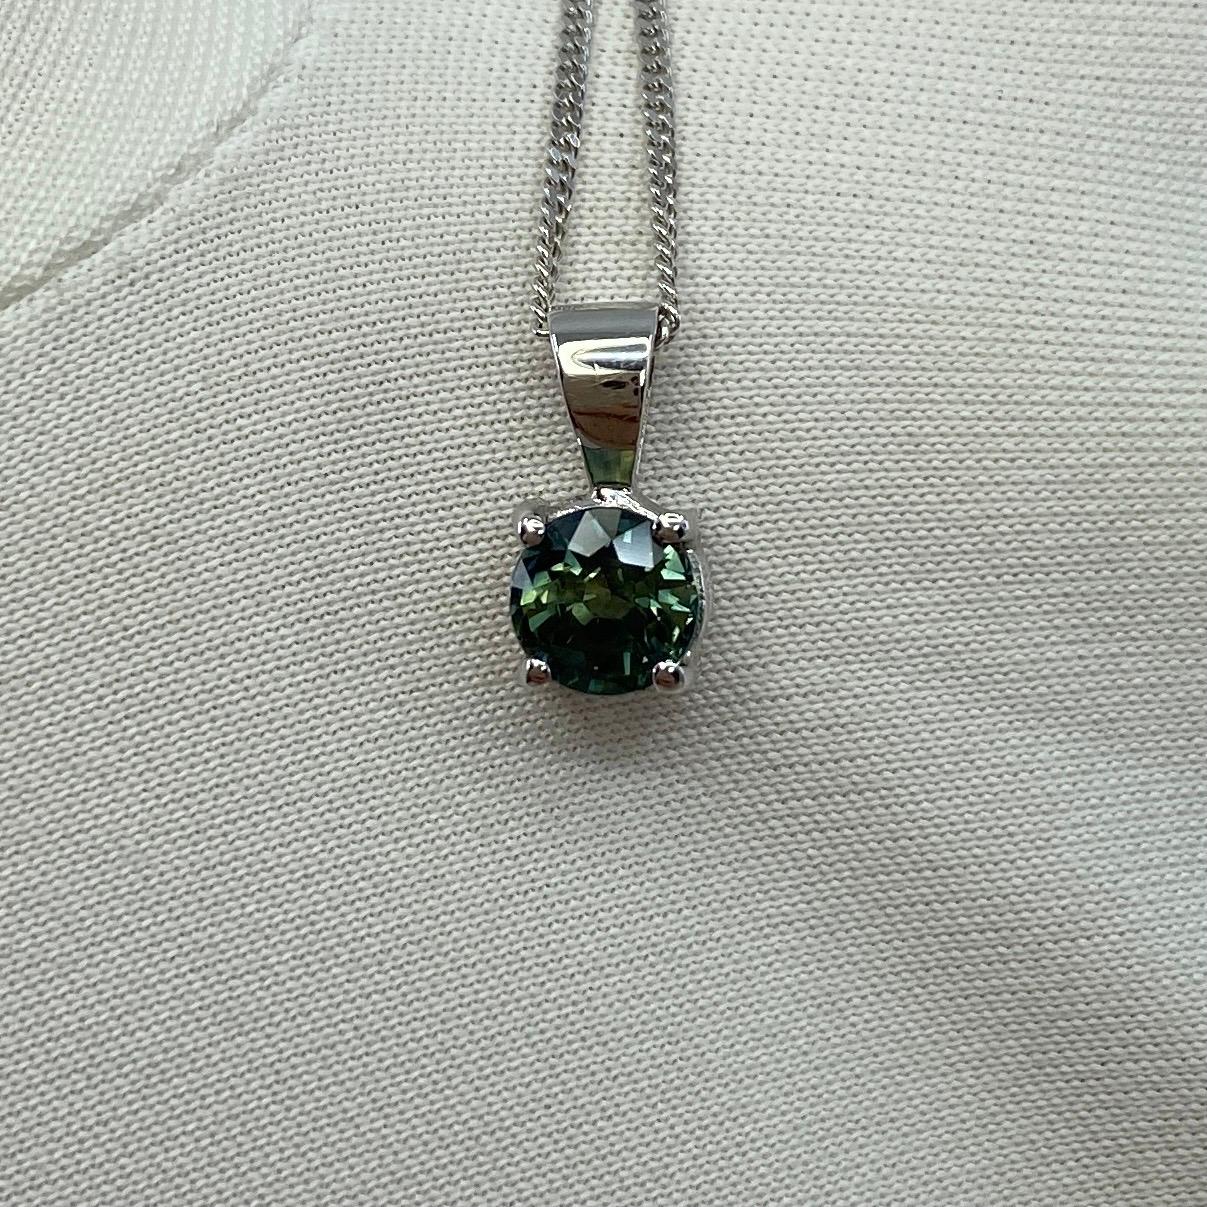 Untreated Parti Colour Blue Green Sapphire 18k White Gold Pendant Necklace.

0.75 Carat sapphire with a unique blue green-yellow colour and excellent clarity, very clean stone.
The sapphire also has an excellent round brilliant cut which shows lots